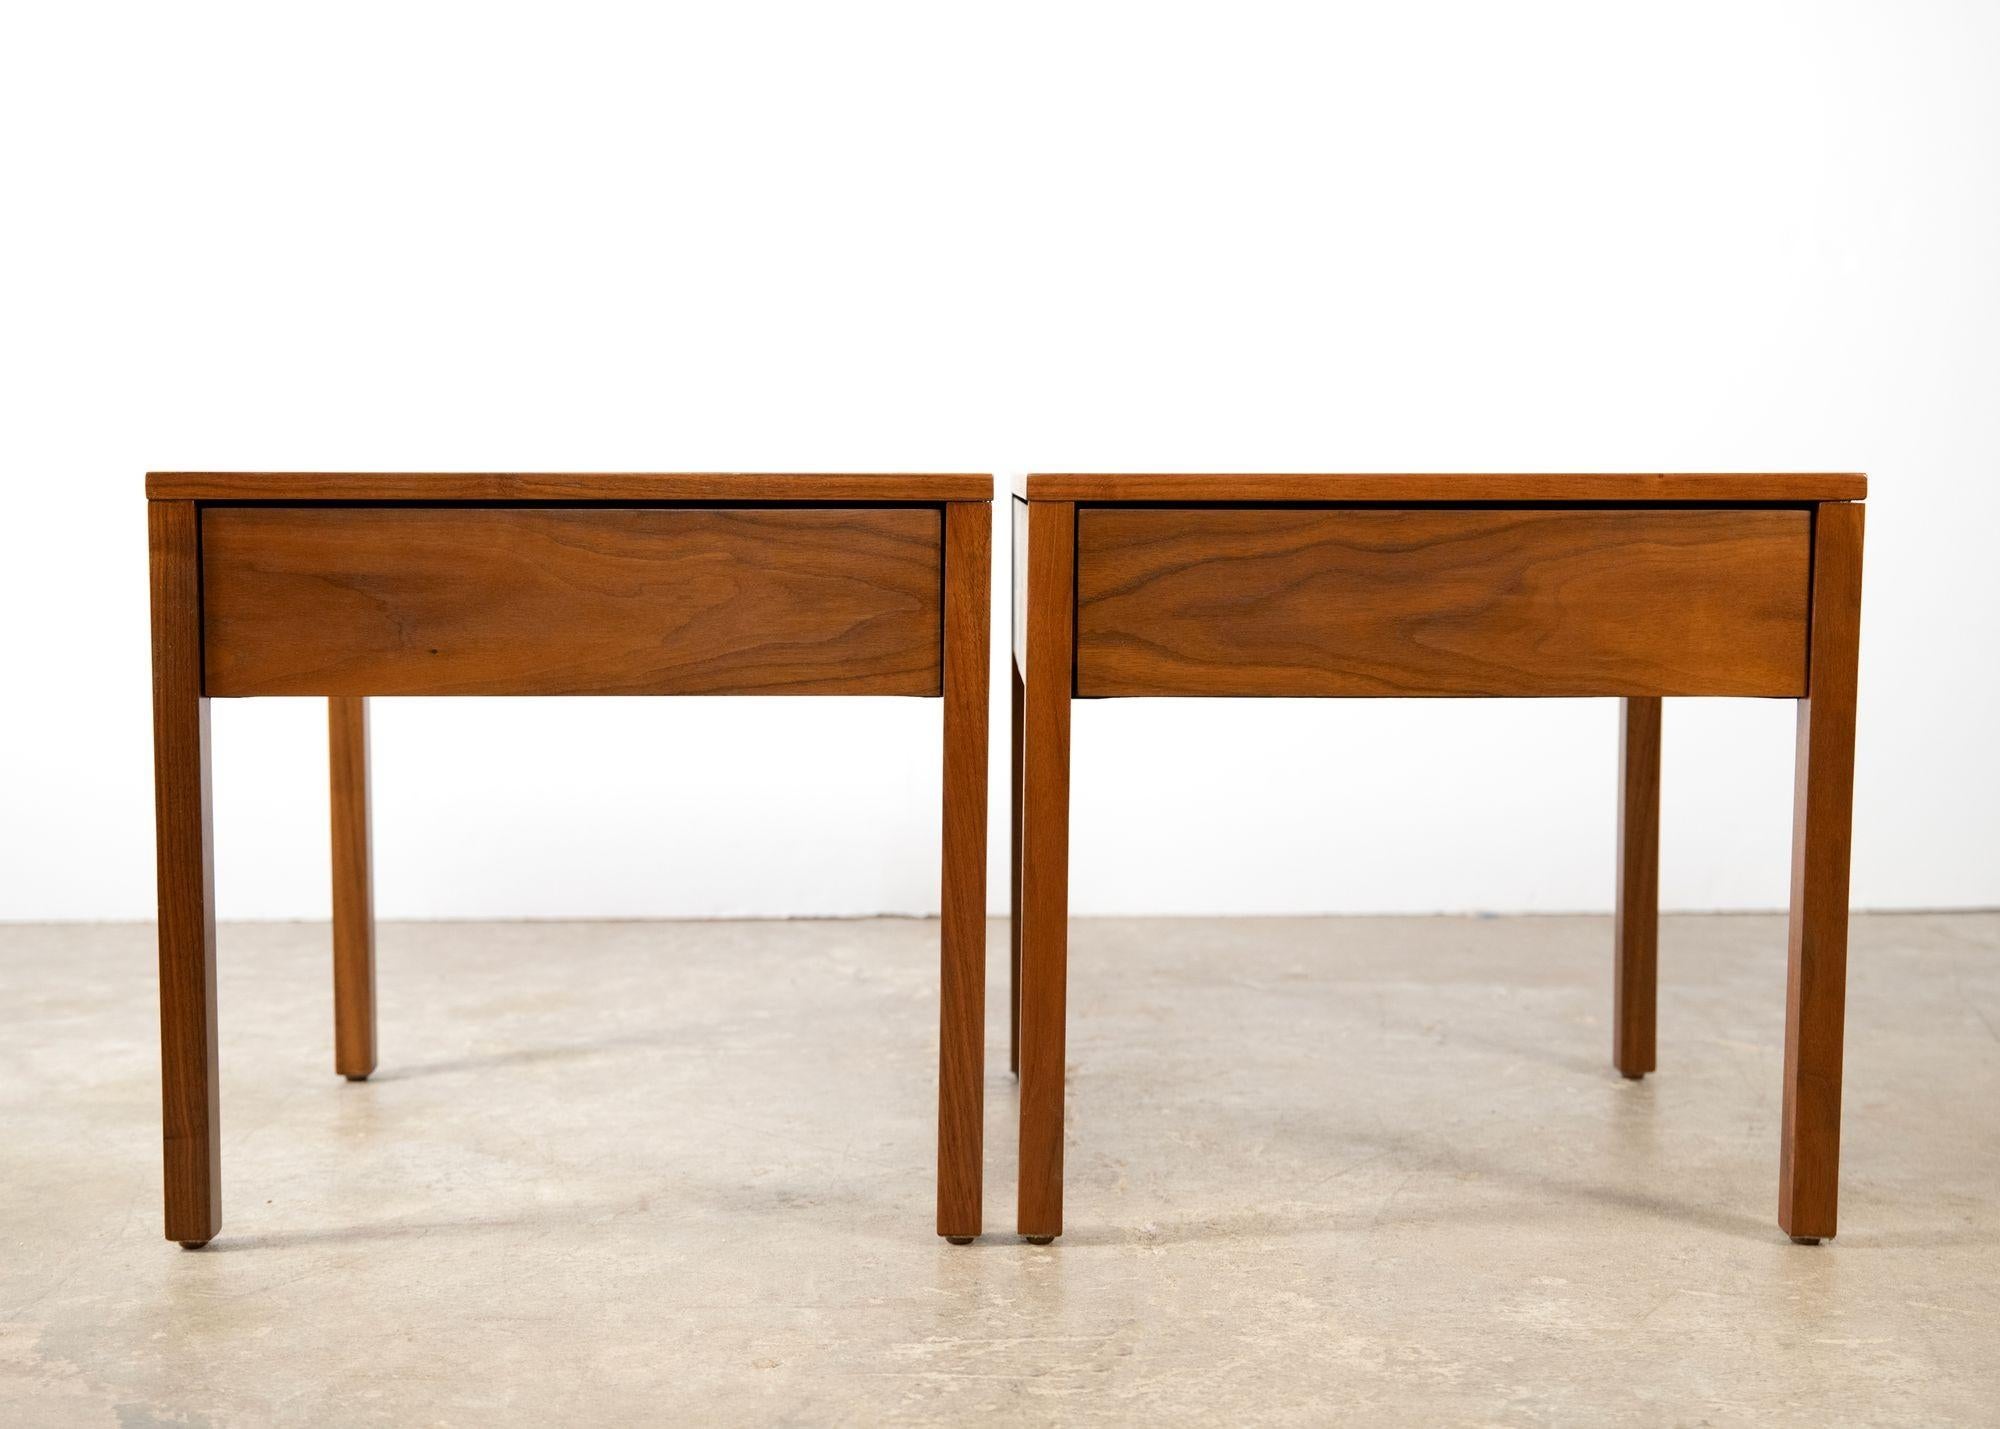 Florence Knoll Nightstands in Walnut for Knoll Associates Early Production In Good Condition For Sale In Dallas, TX